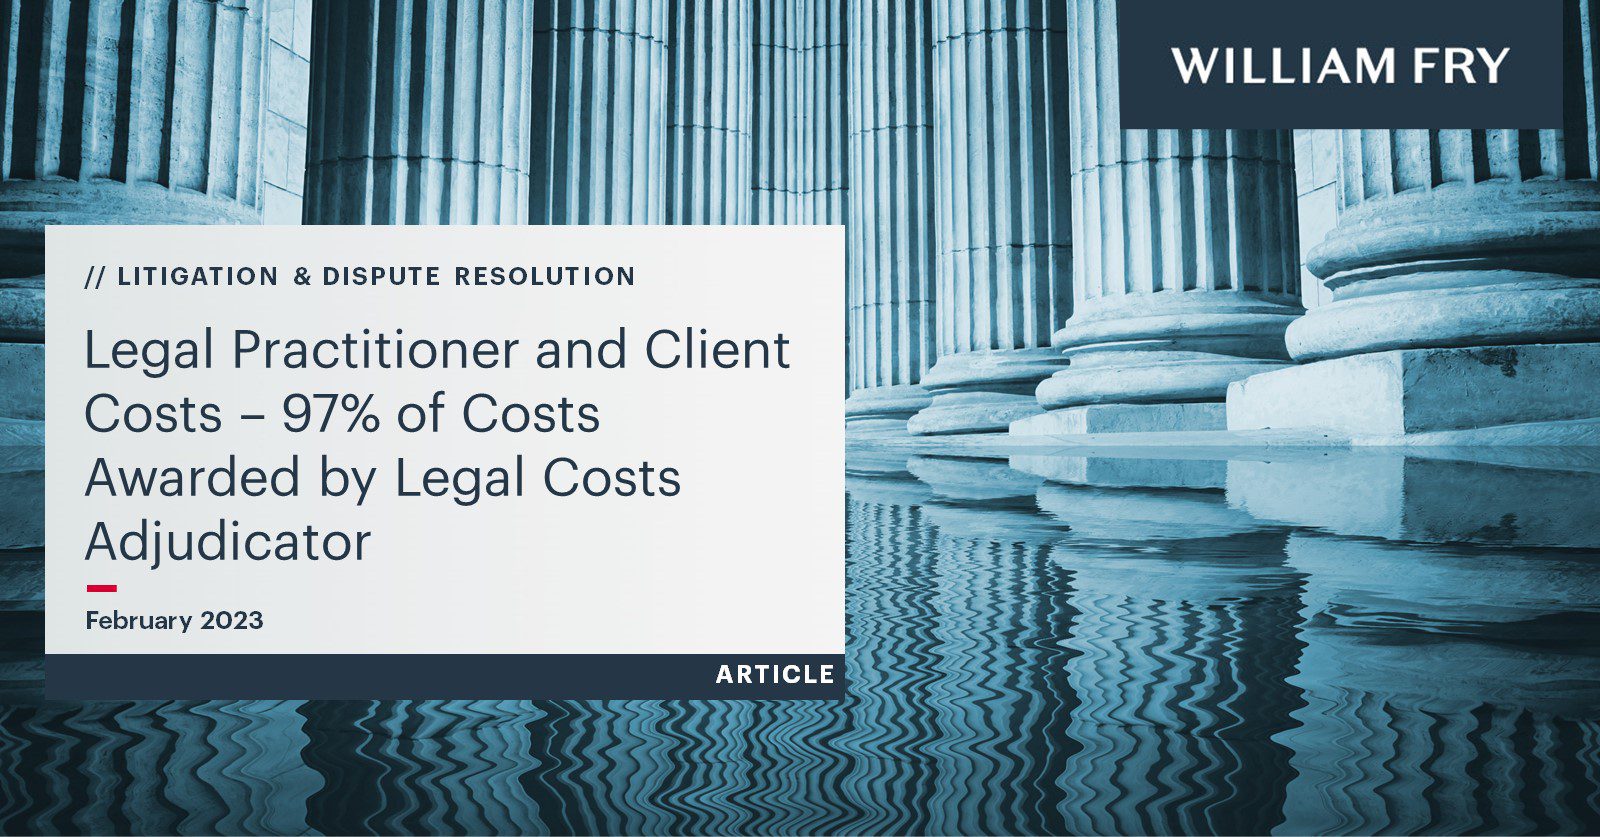 Legal Practitioner and Client Costs – 97% of Costs Awarded by Legal Costs Adjudicator